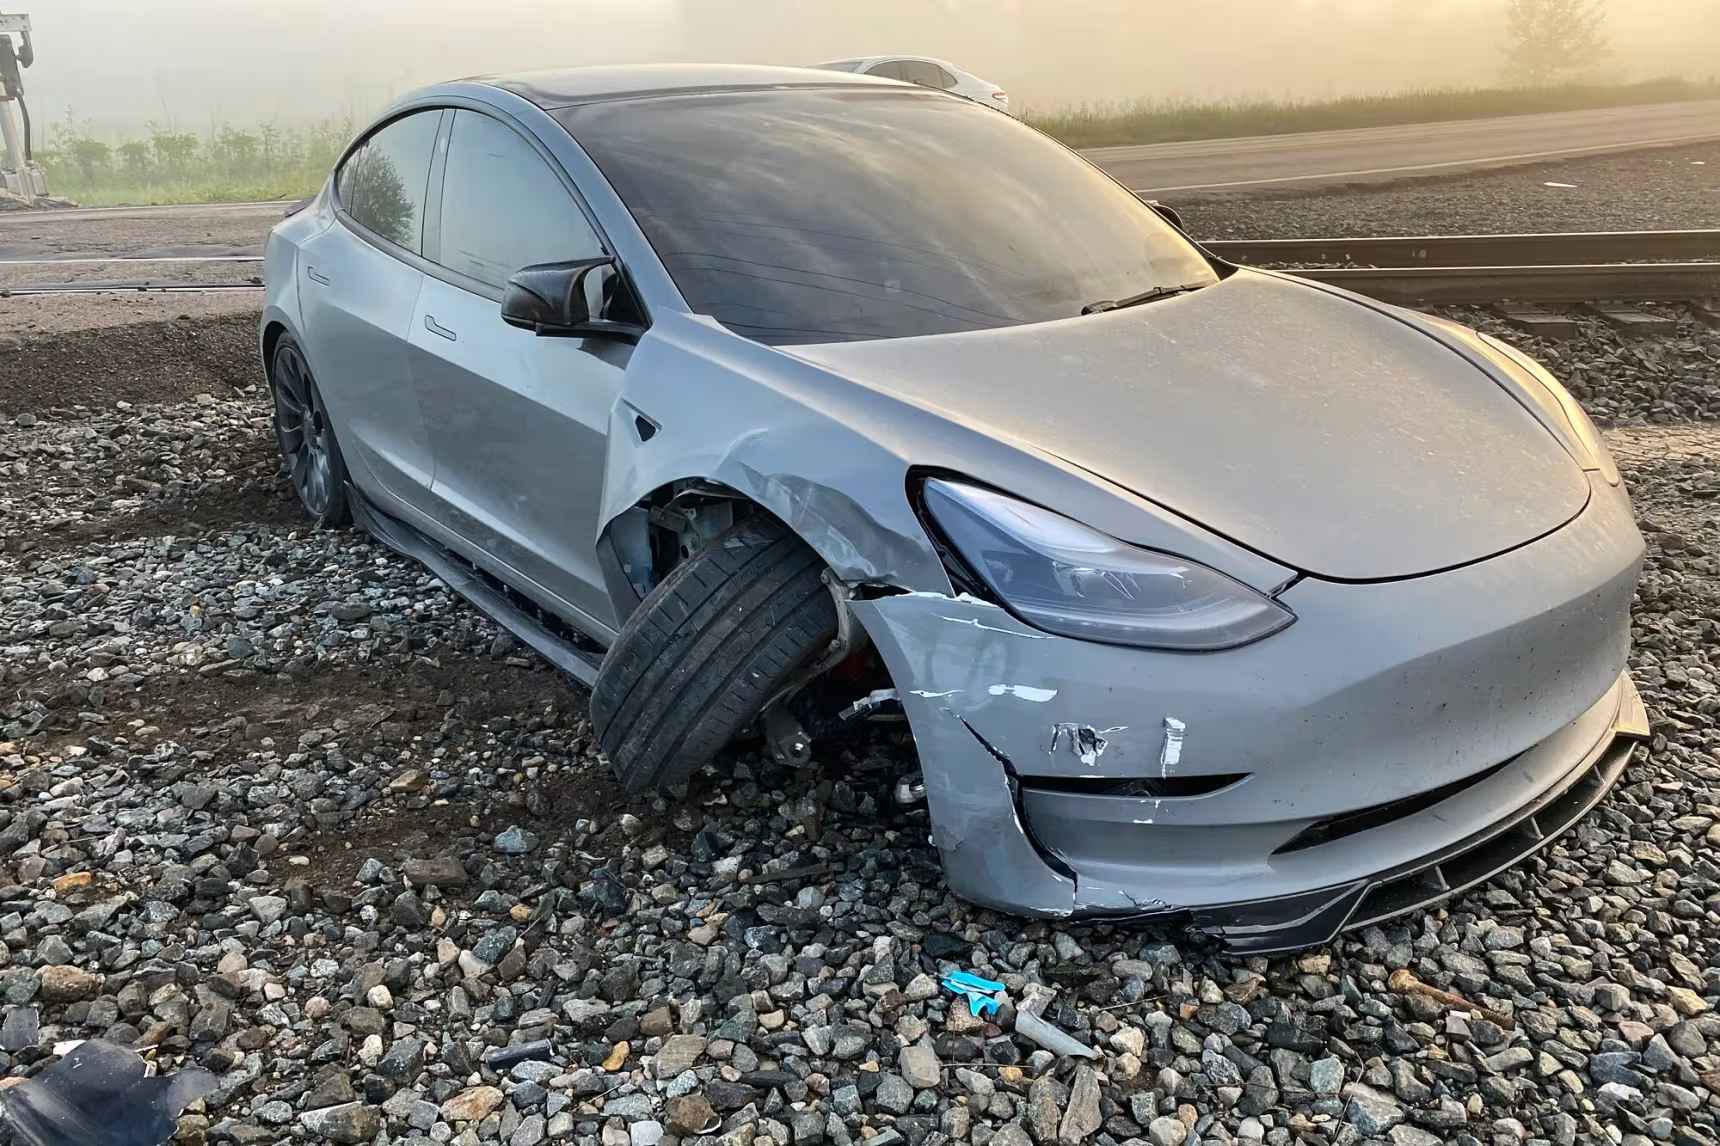 A Tesla car failed to recognise a train in the fog in self-driving mode, causing an accident, but without injuries